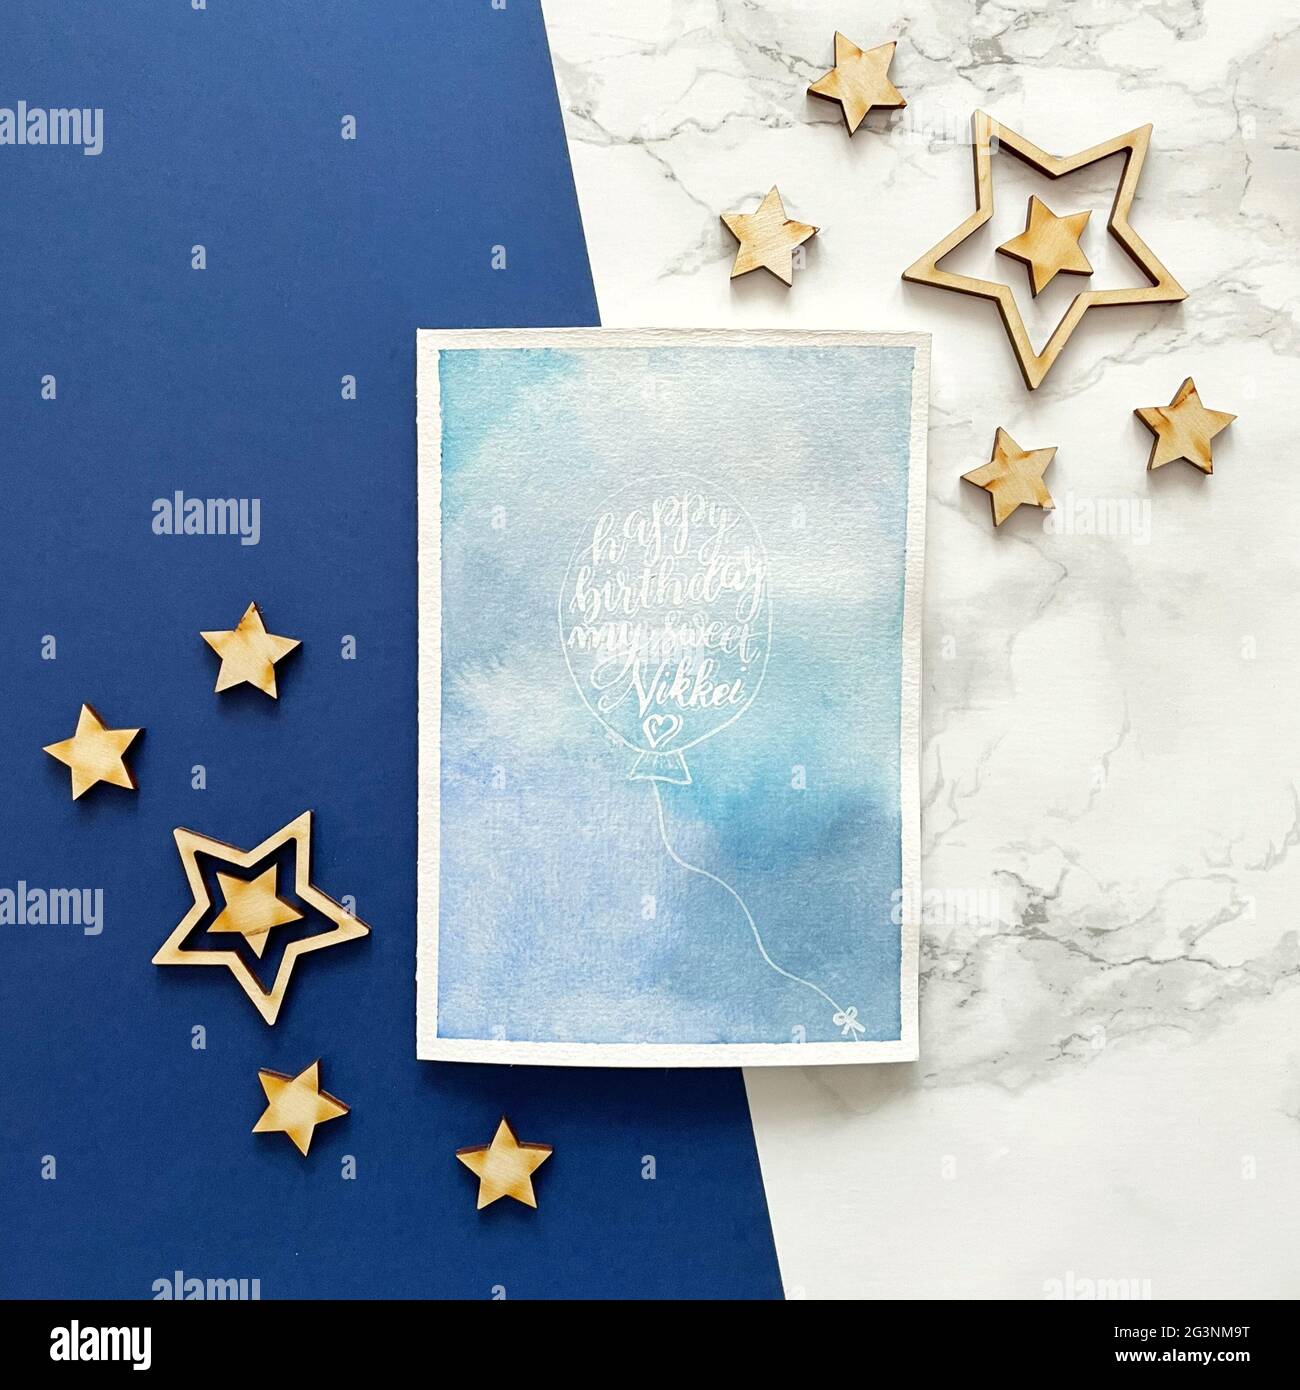 Happy Birthday Card with calligraphy style on blue watercolor background Stock Photo